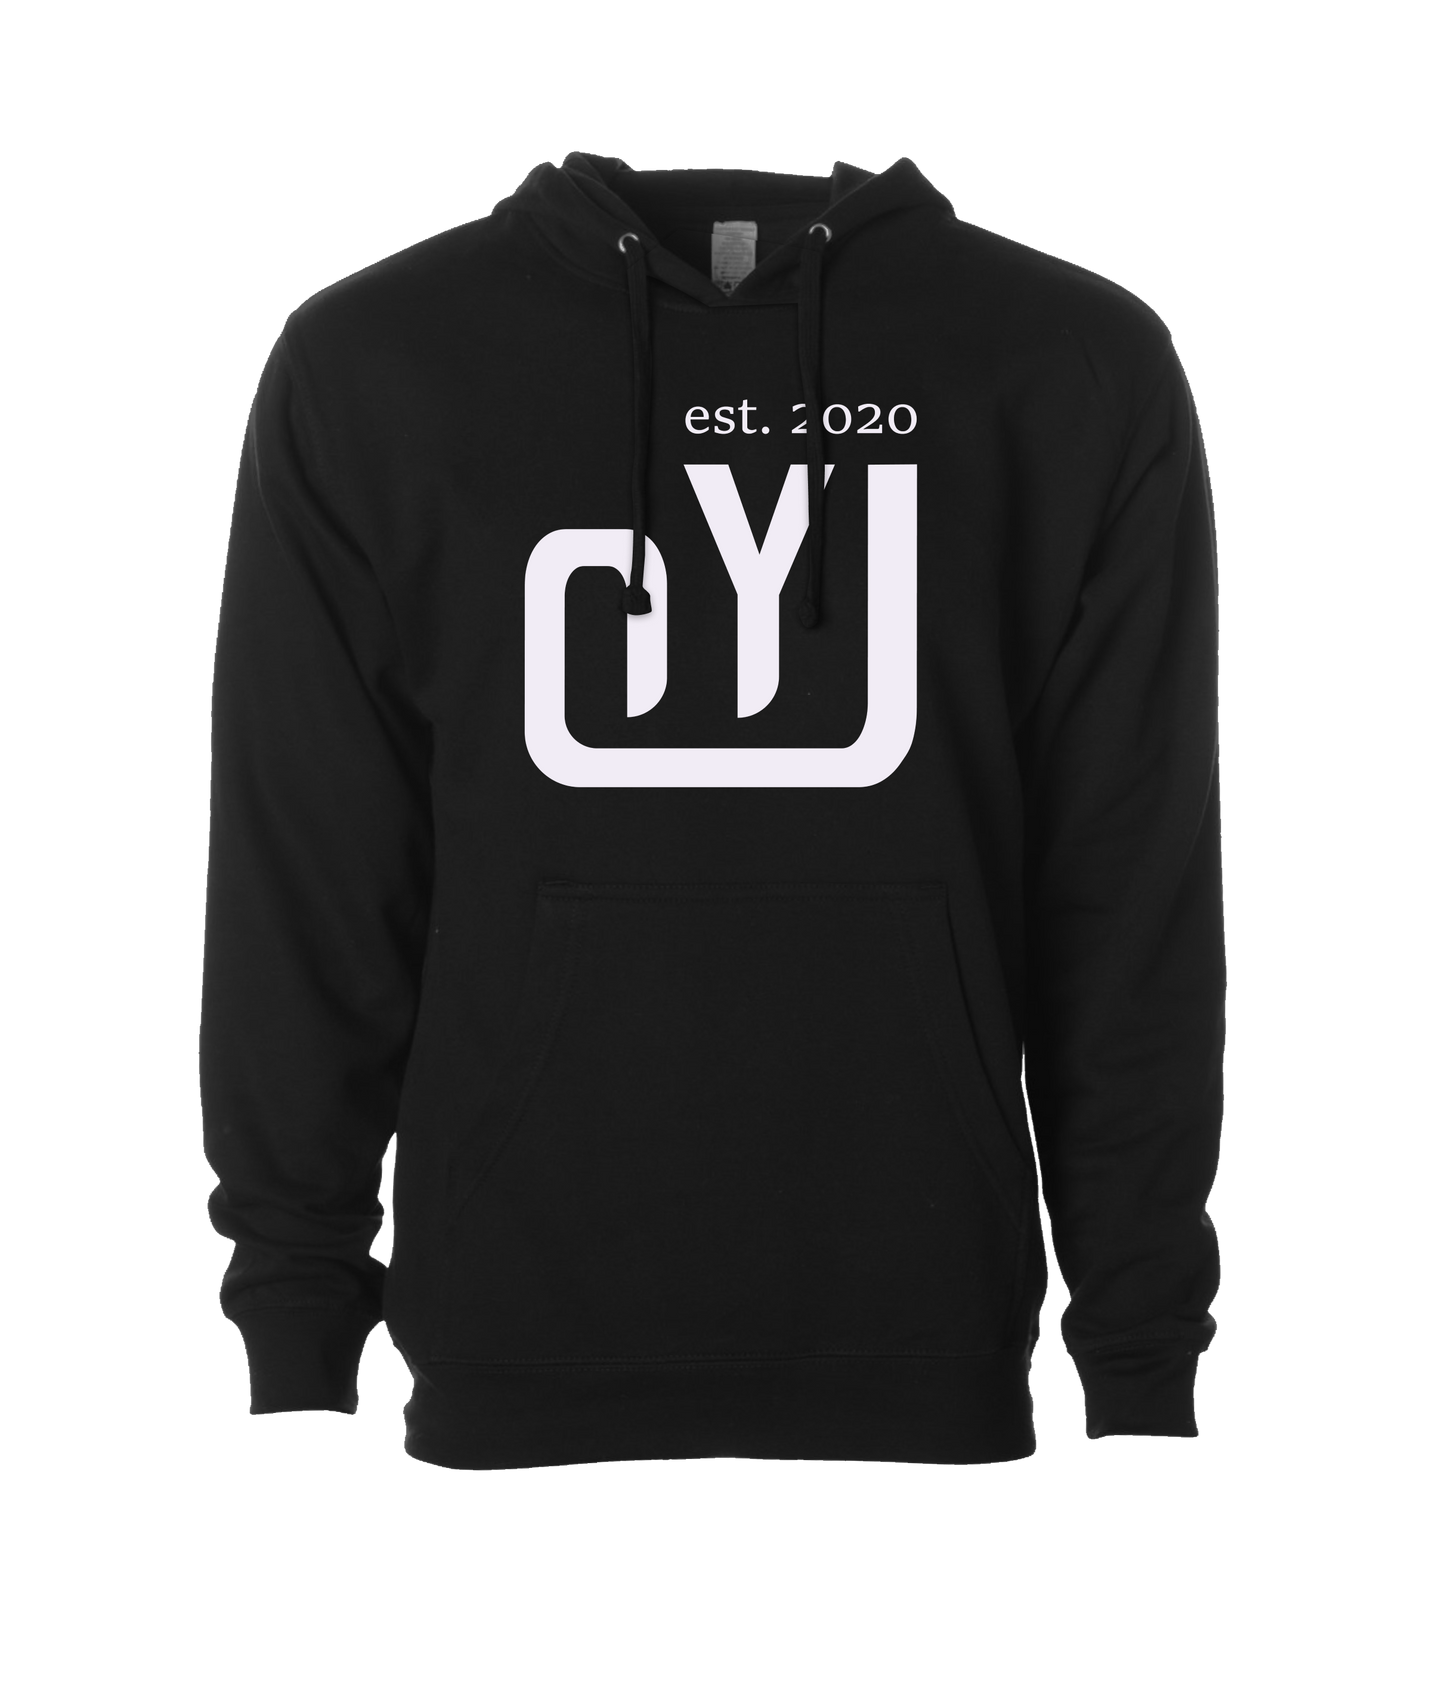 OY Jerky - Submark Color - Black Hoodie